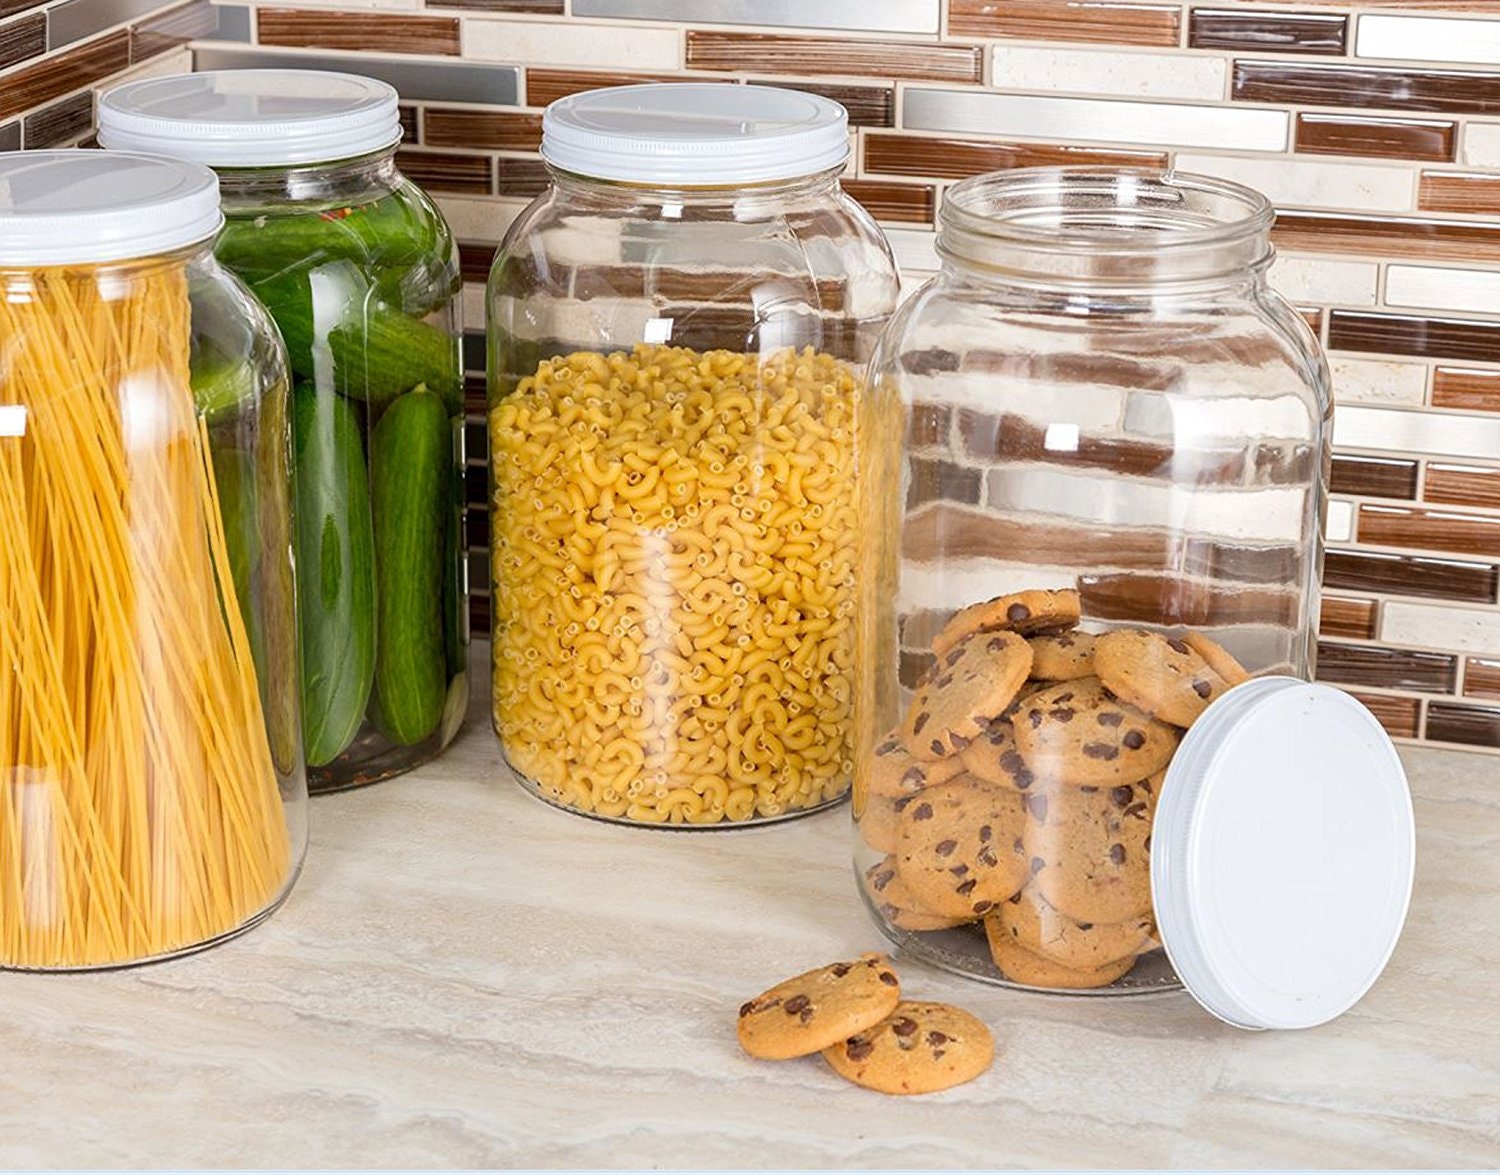 Glass Cookie Jar with Airtight Lids - Cookie, Pastries, Cake and Candy Jar,  Dog Treat Container, BPA-Free Clear Glass Storage Container Canister 